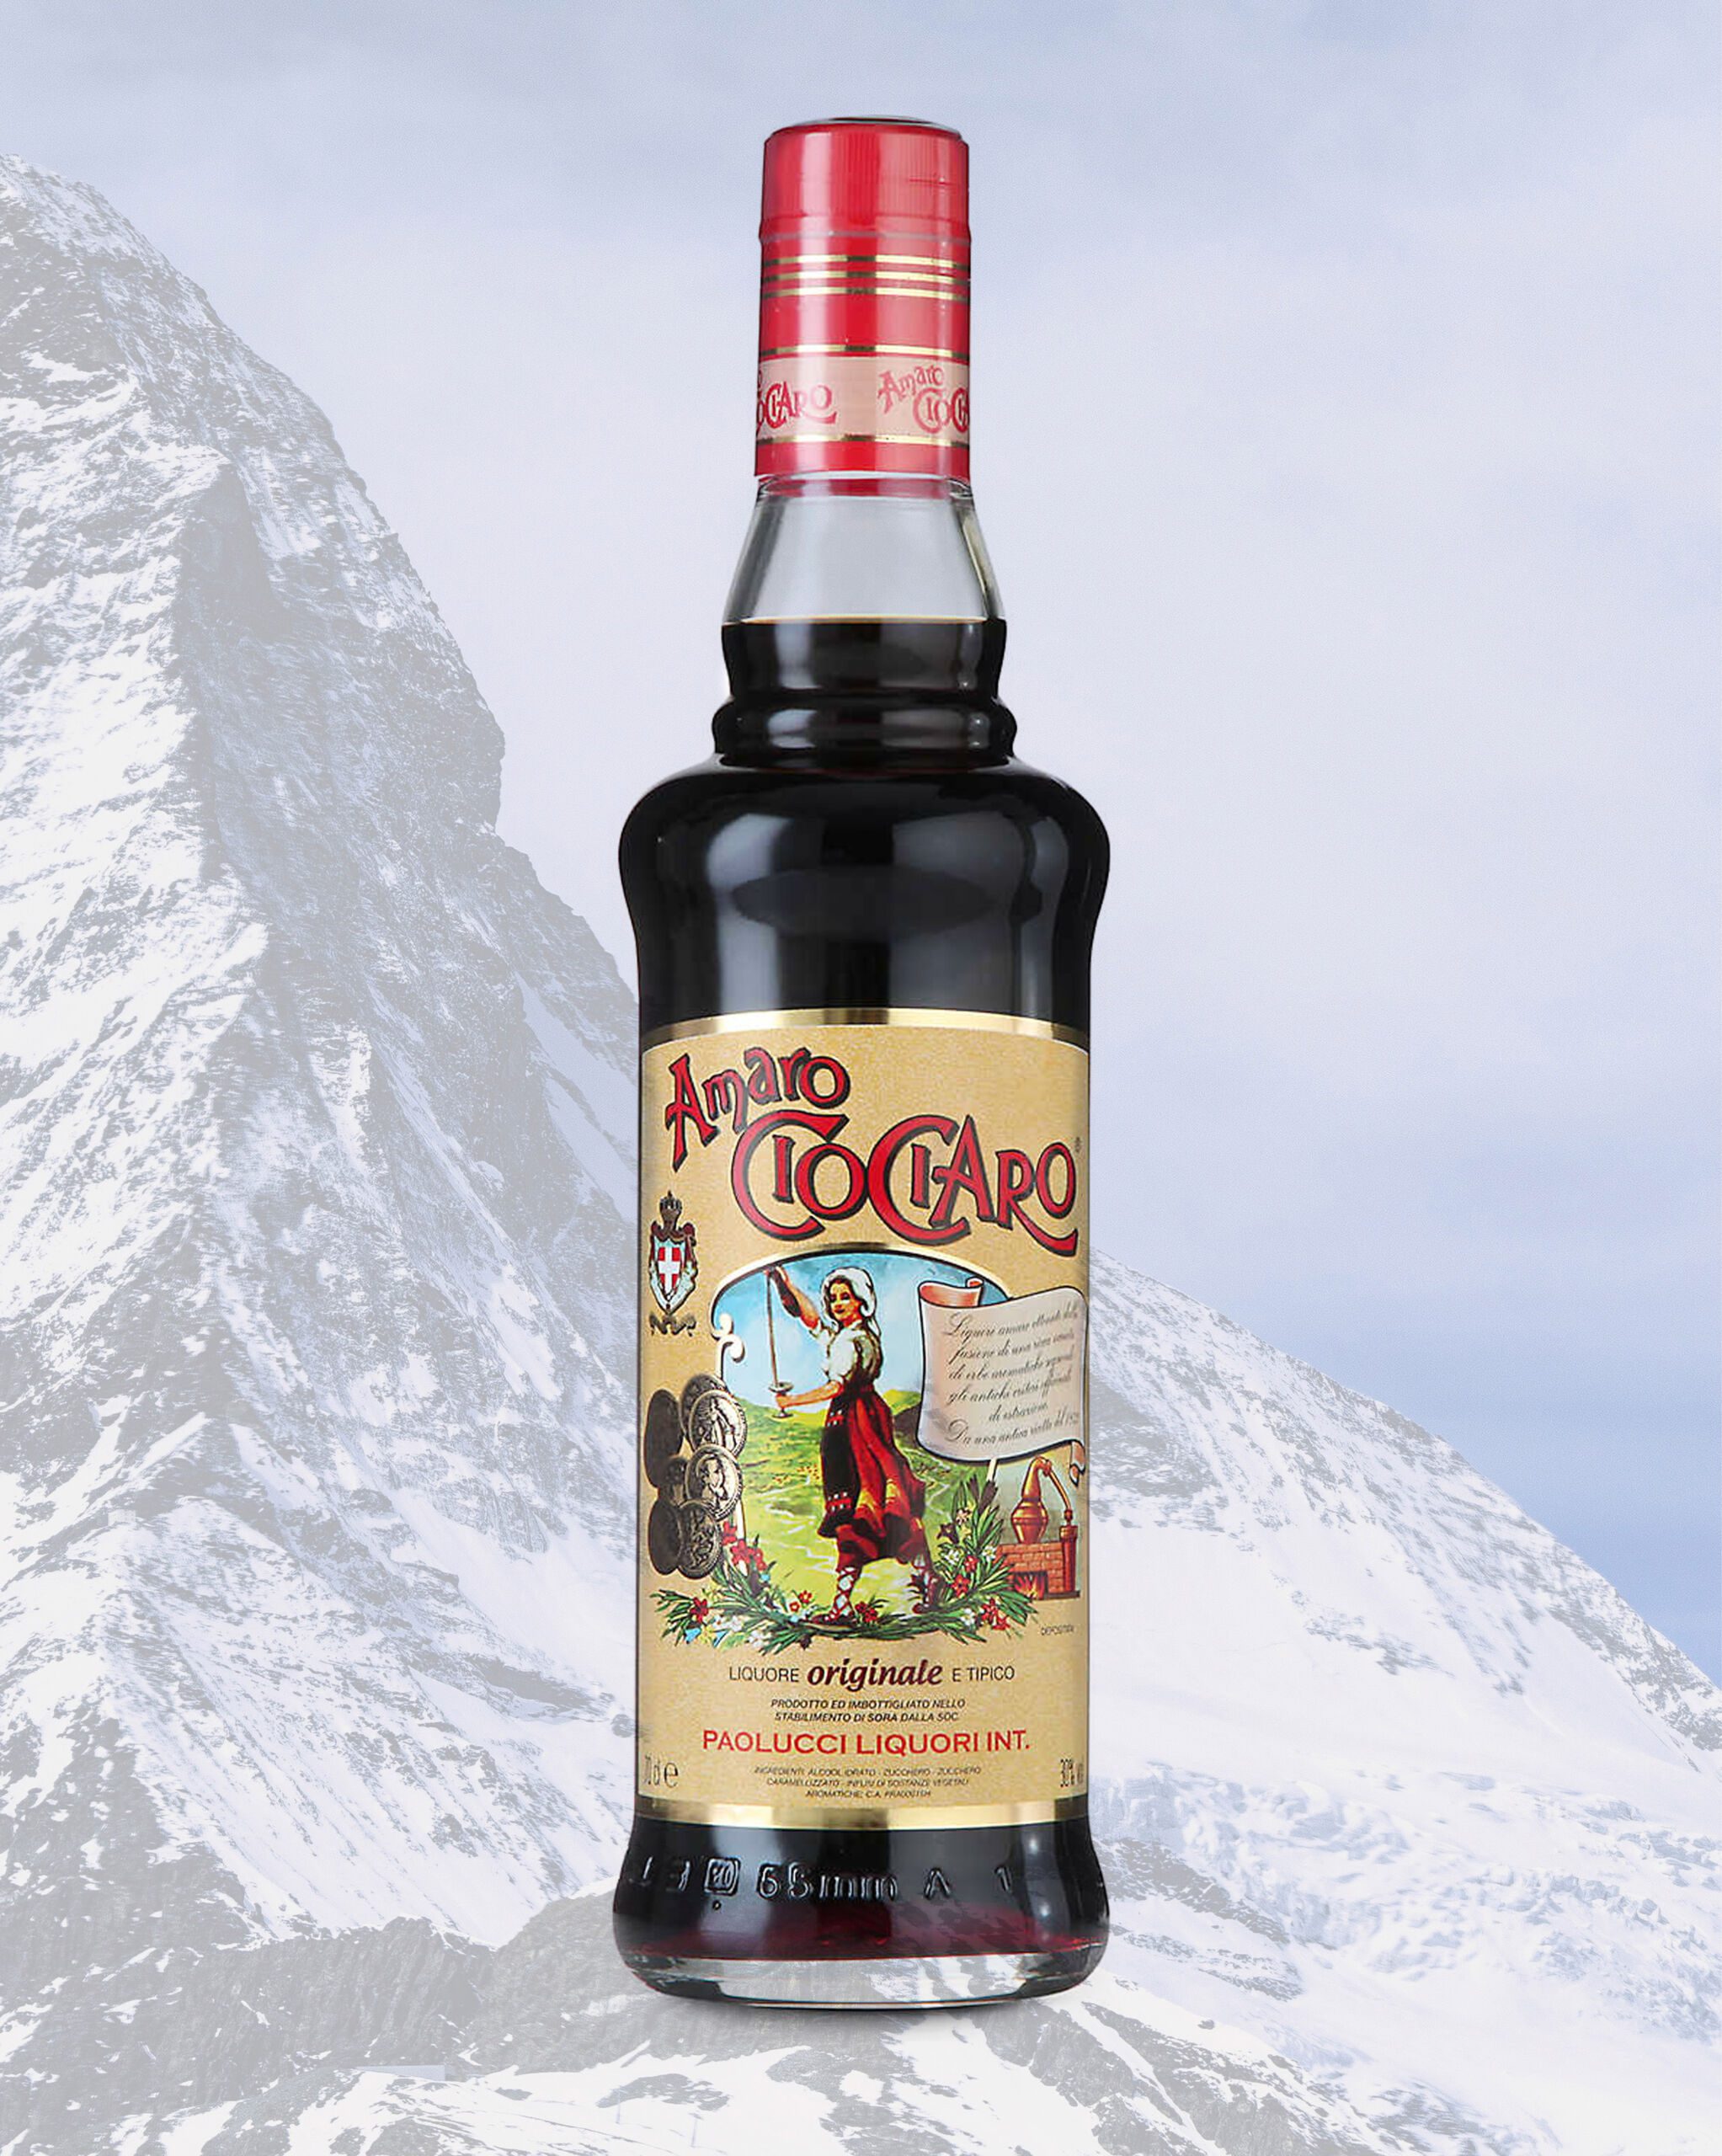 These Alpine liqueurs will bring après-ski spirit to your drinks cabinet